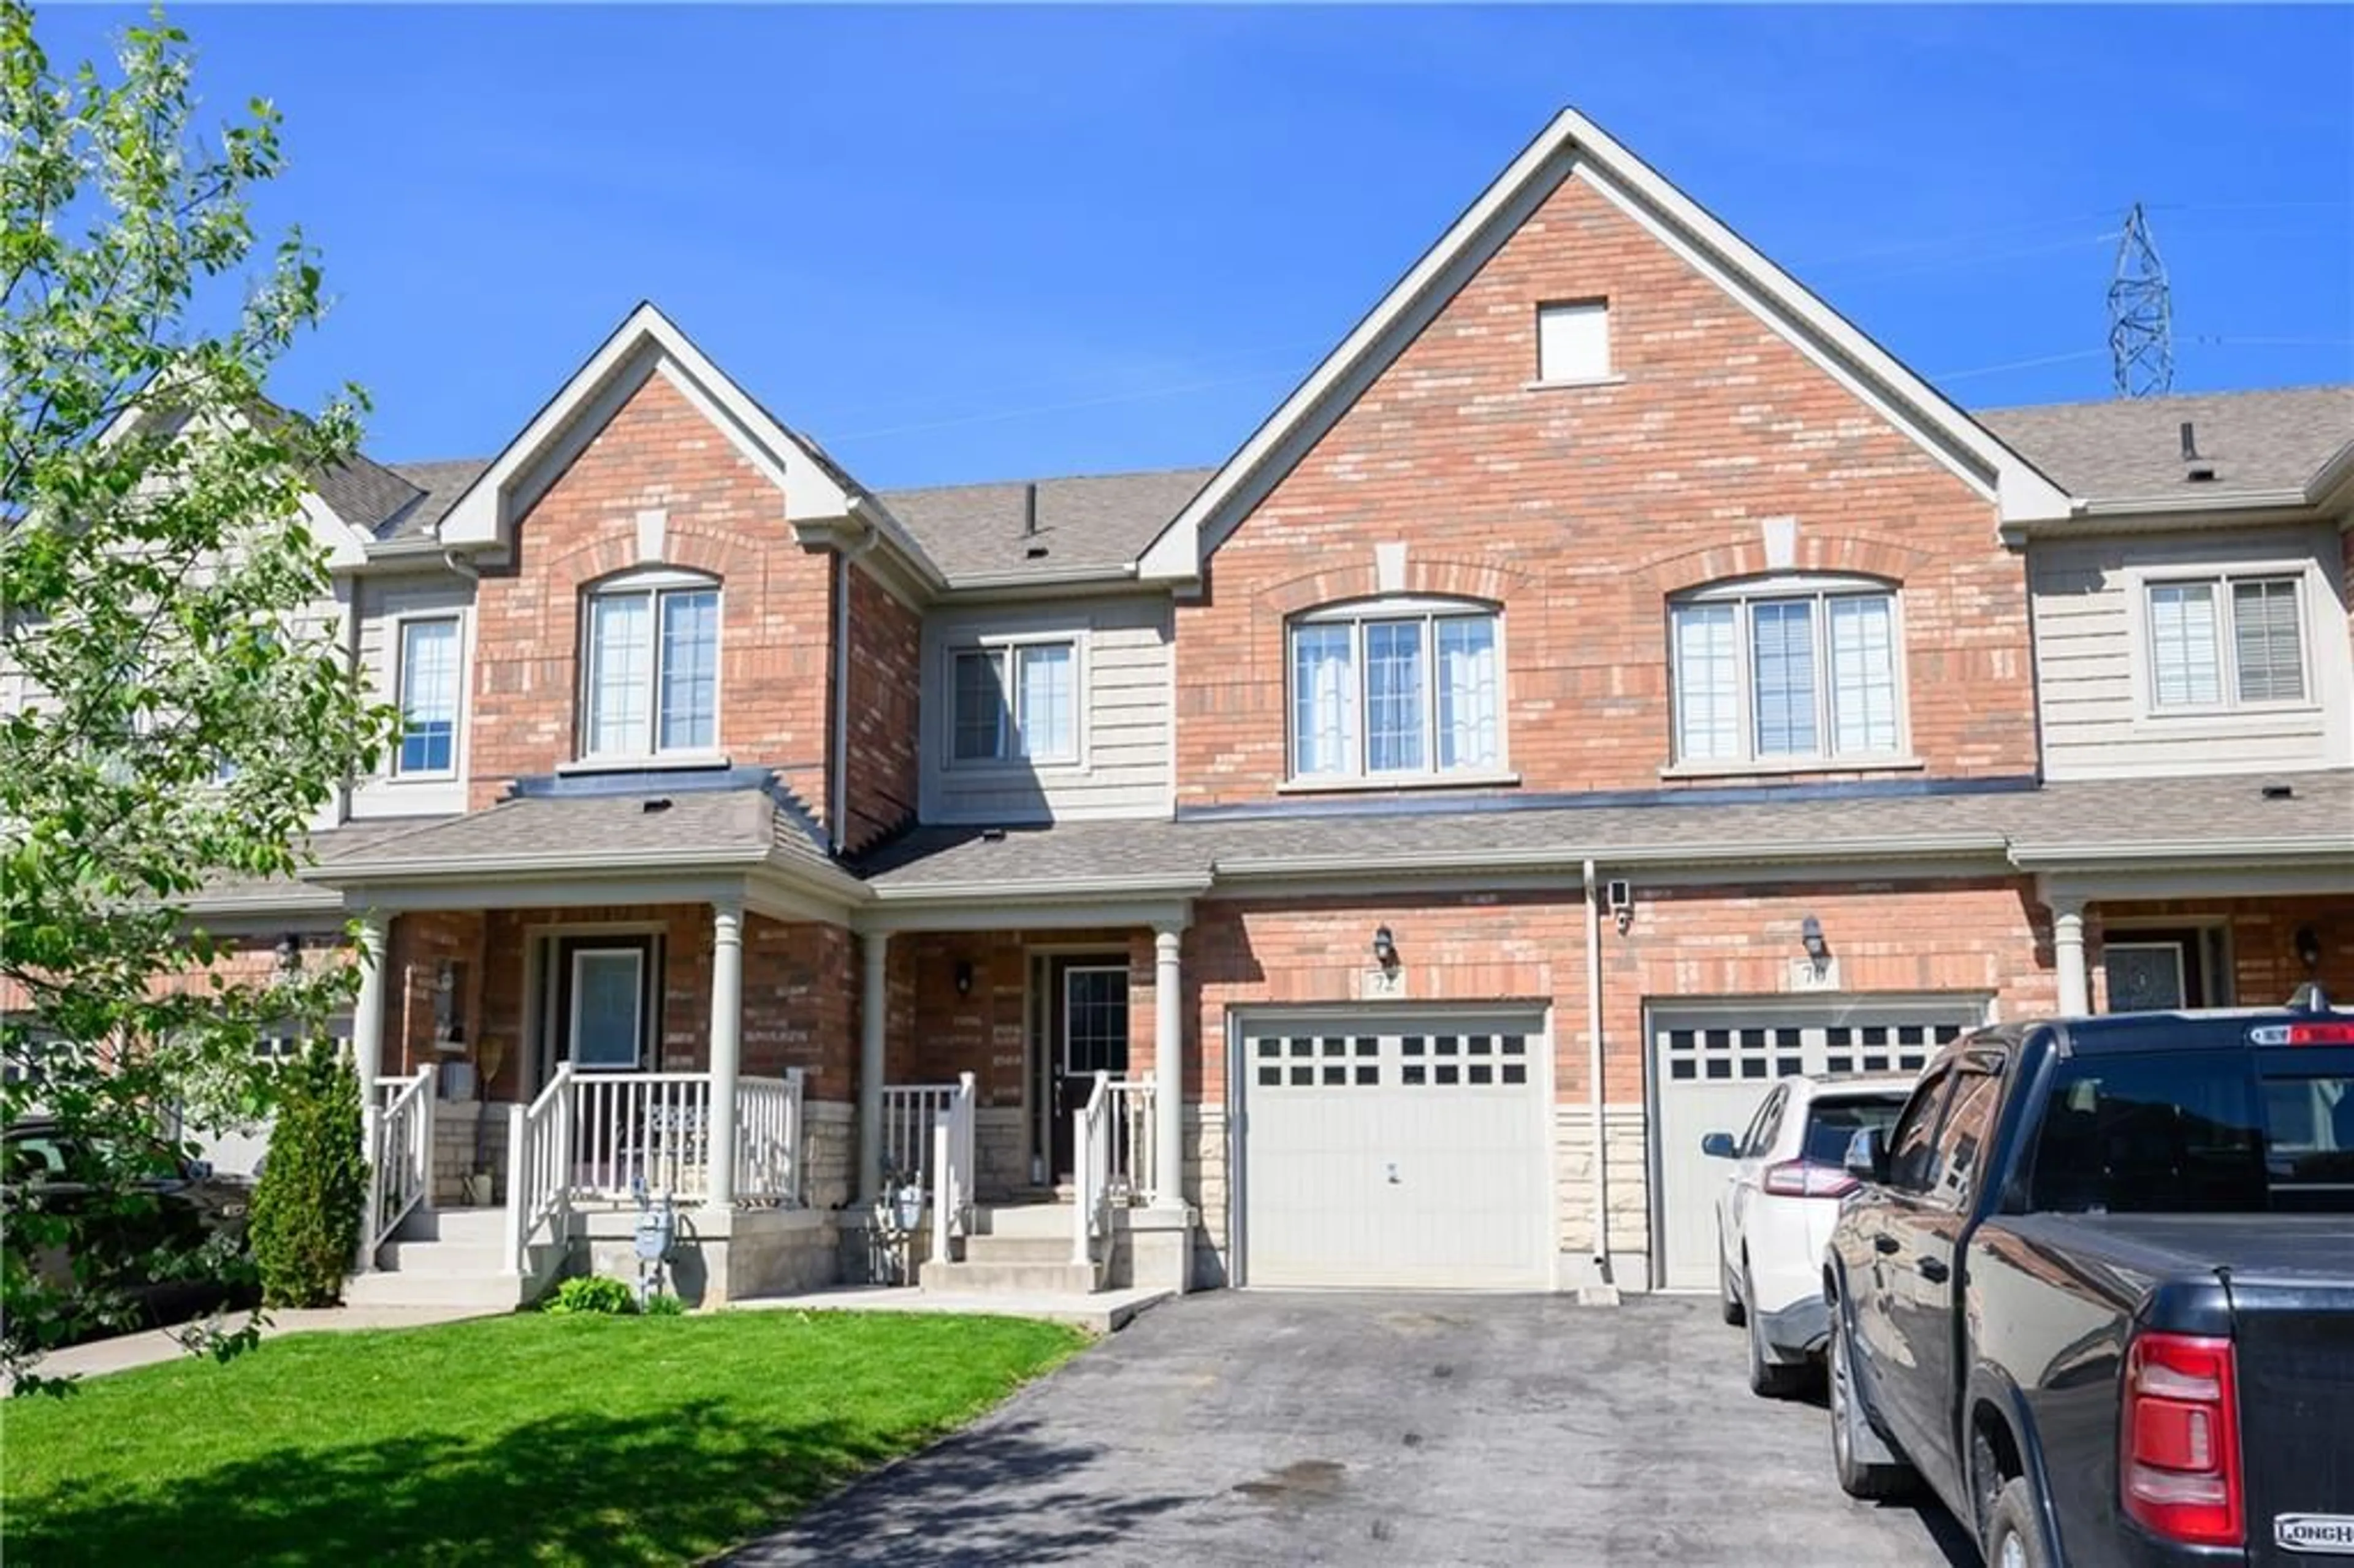 Home with brick exterior material for 72 Sunset Way, Thorold Ontario L0S 1A0